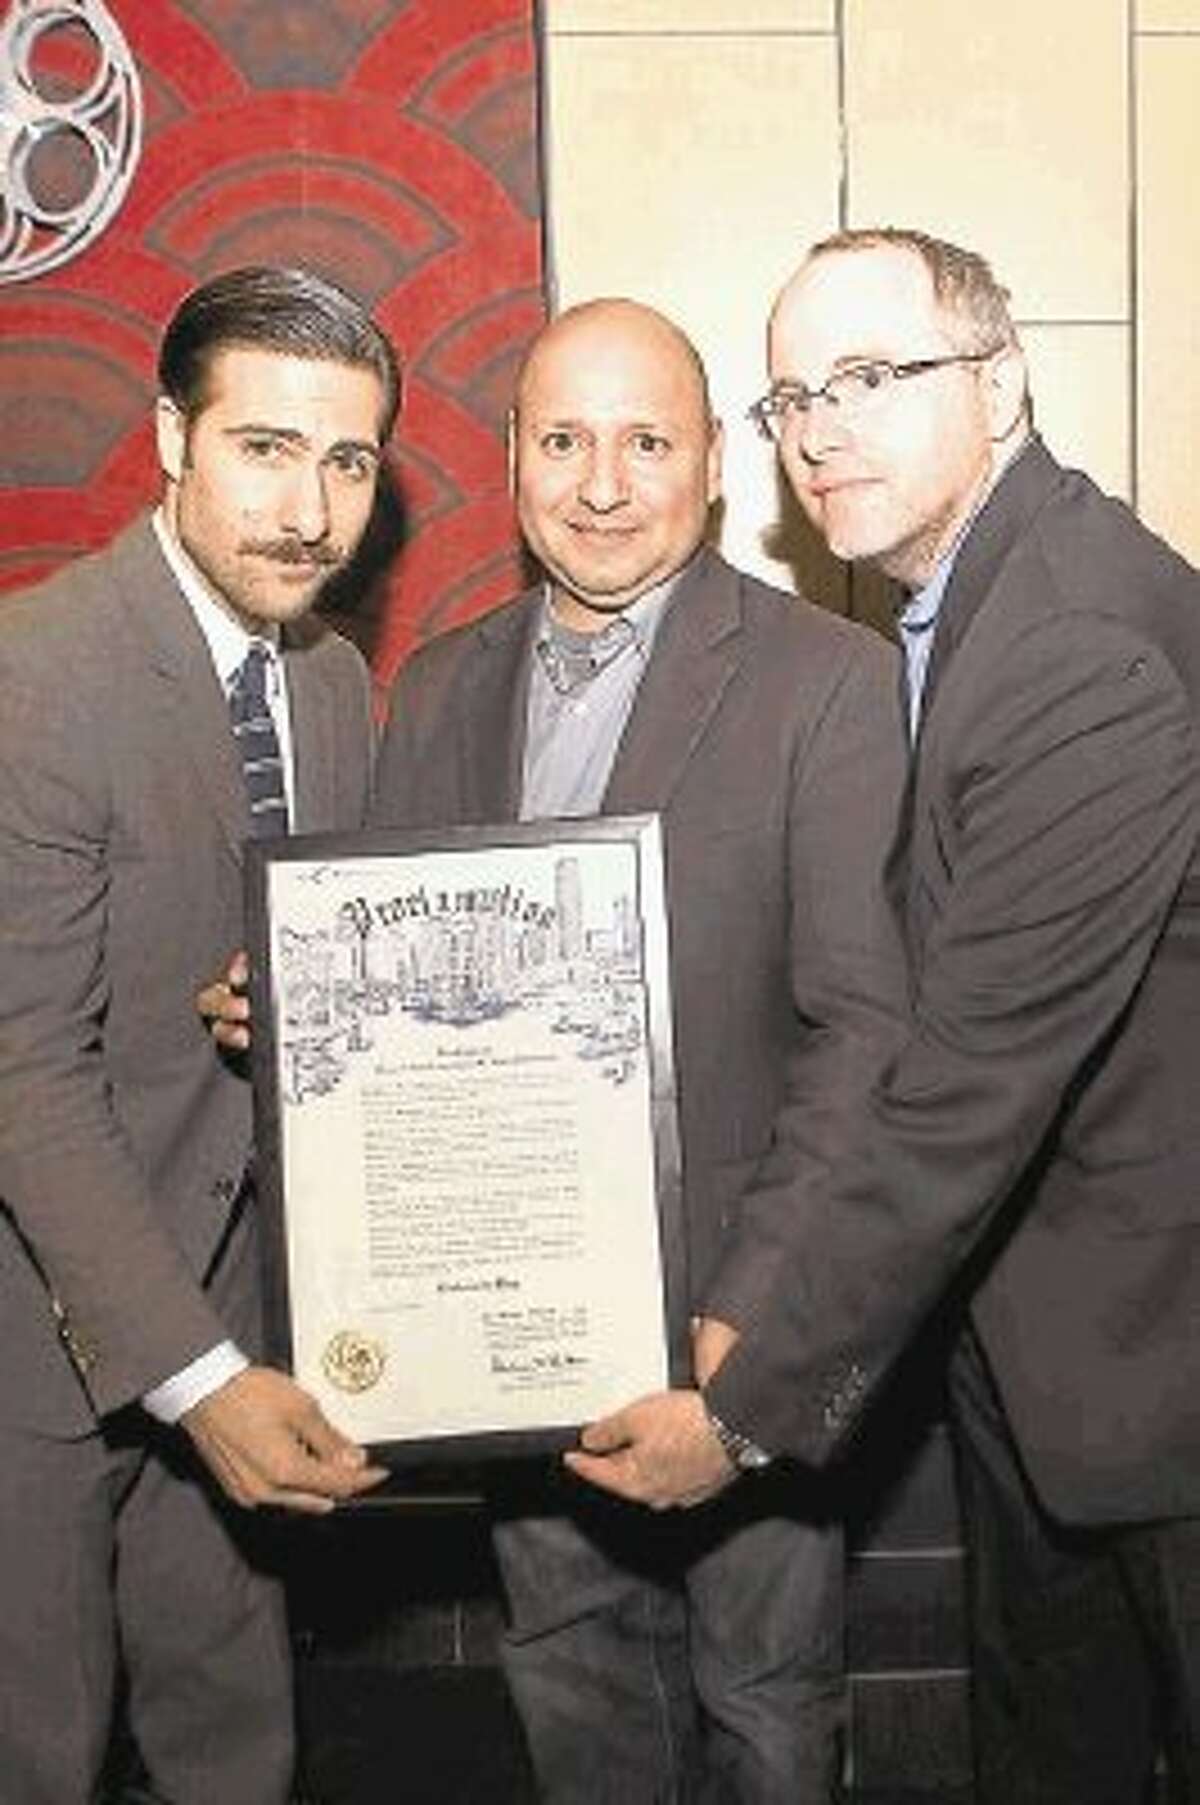 Schwartzman (left) was presented a proclamation by the City of Houston for the official Rushmore Day from Alfred Cervantes of the Houston Film Commission and Joshua Starnes of the Houston Film Critics Society.